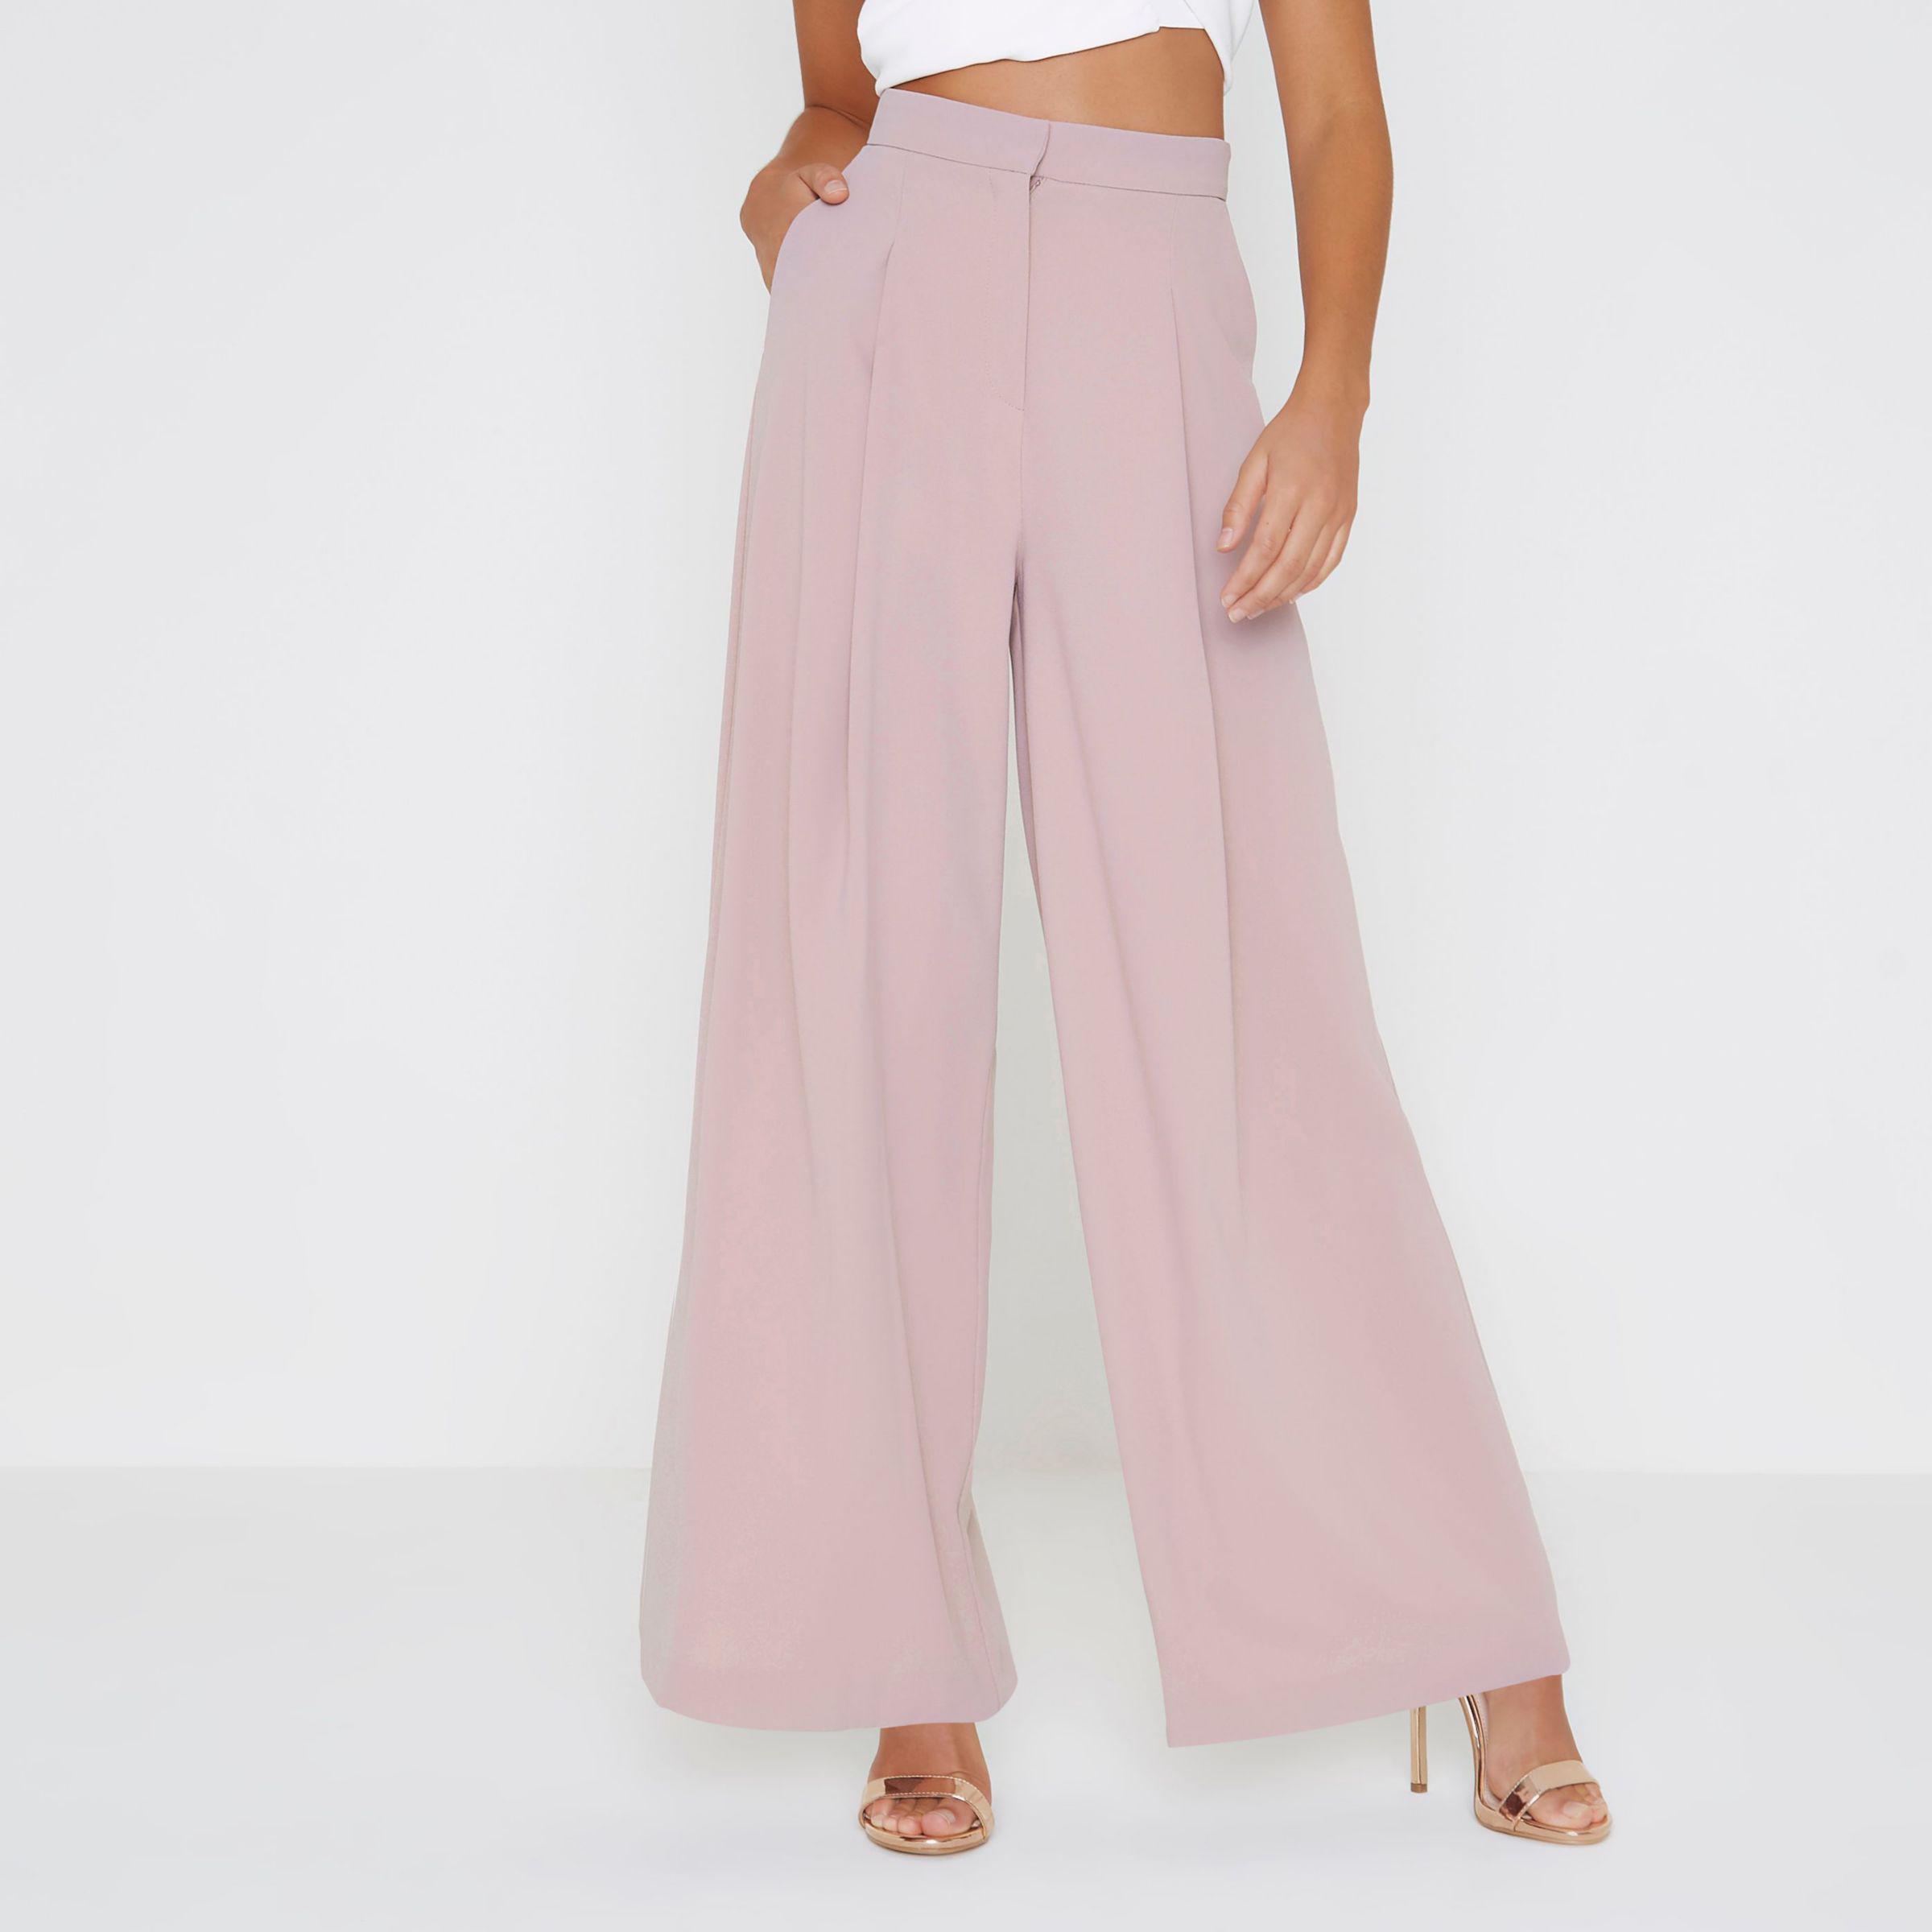 River Island Synthetic Light Wide Leg Trousers in Pink | Lyst